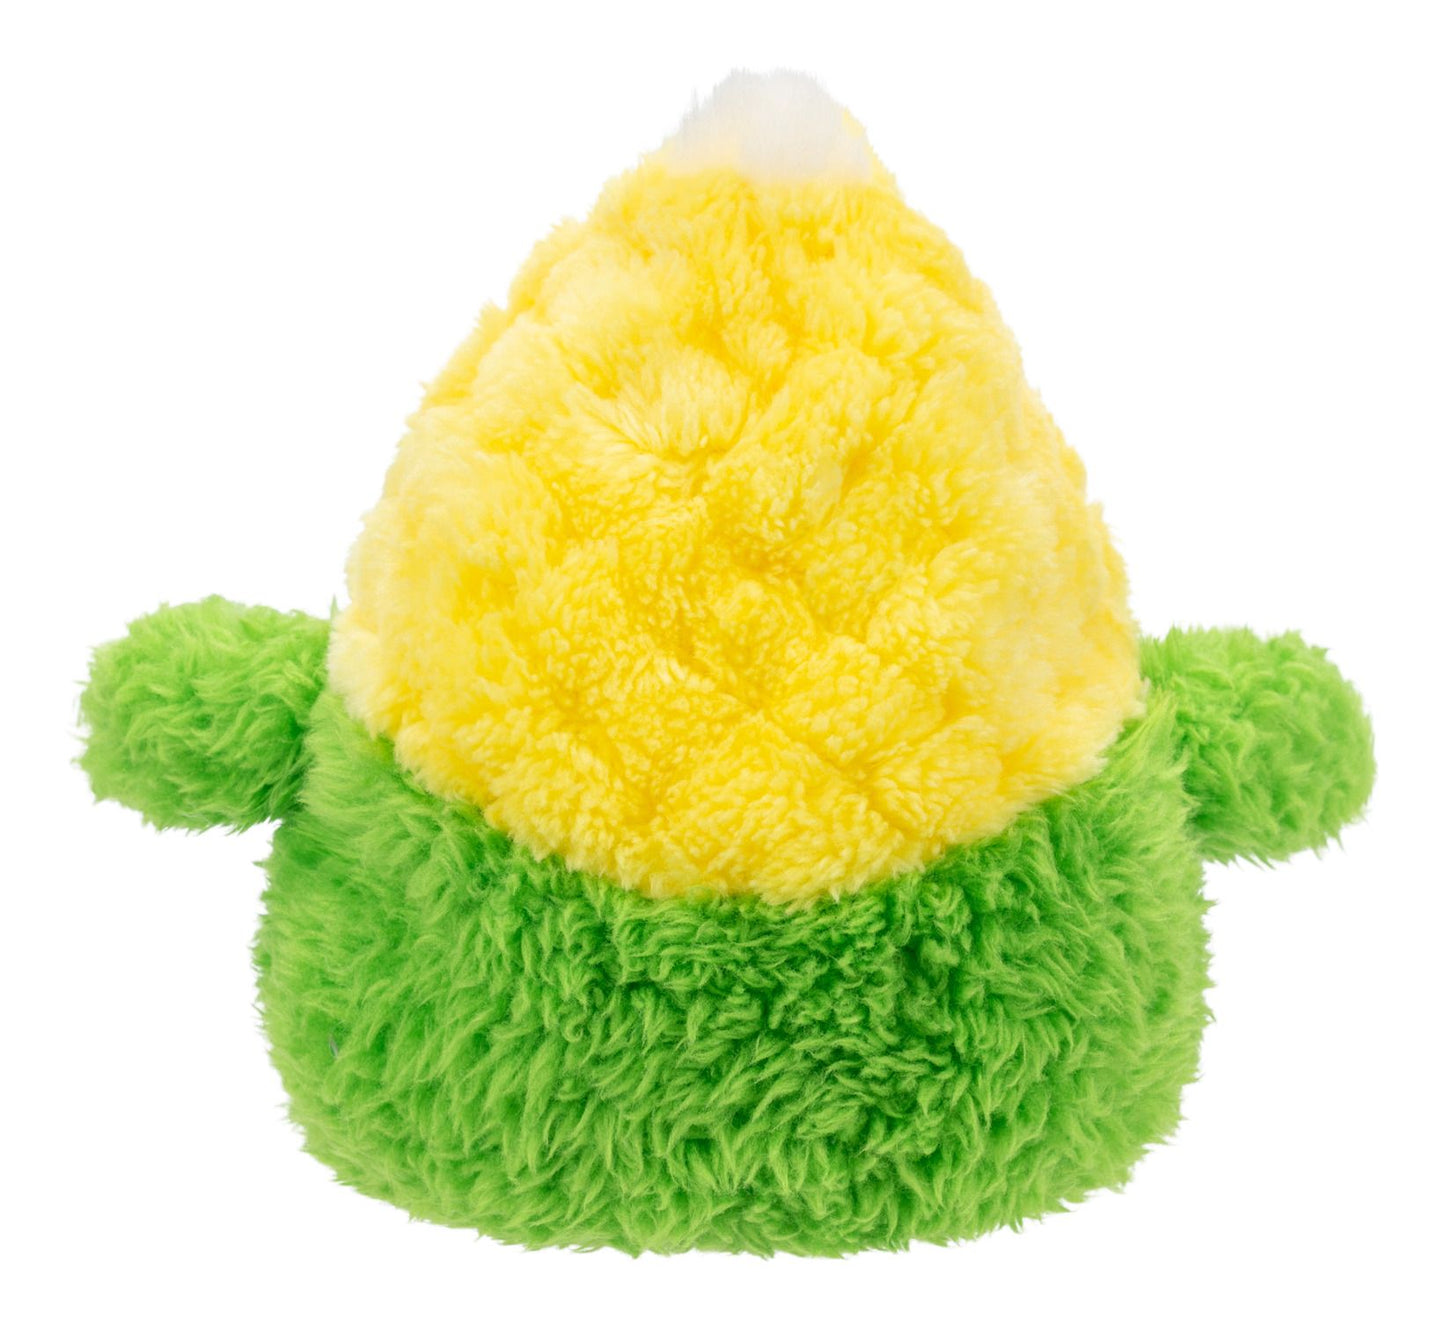 BumBumz Rootbumz Colby the Corn 4.5 Inch Plush Beanie Filled Toy